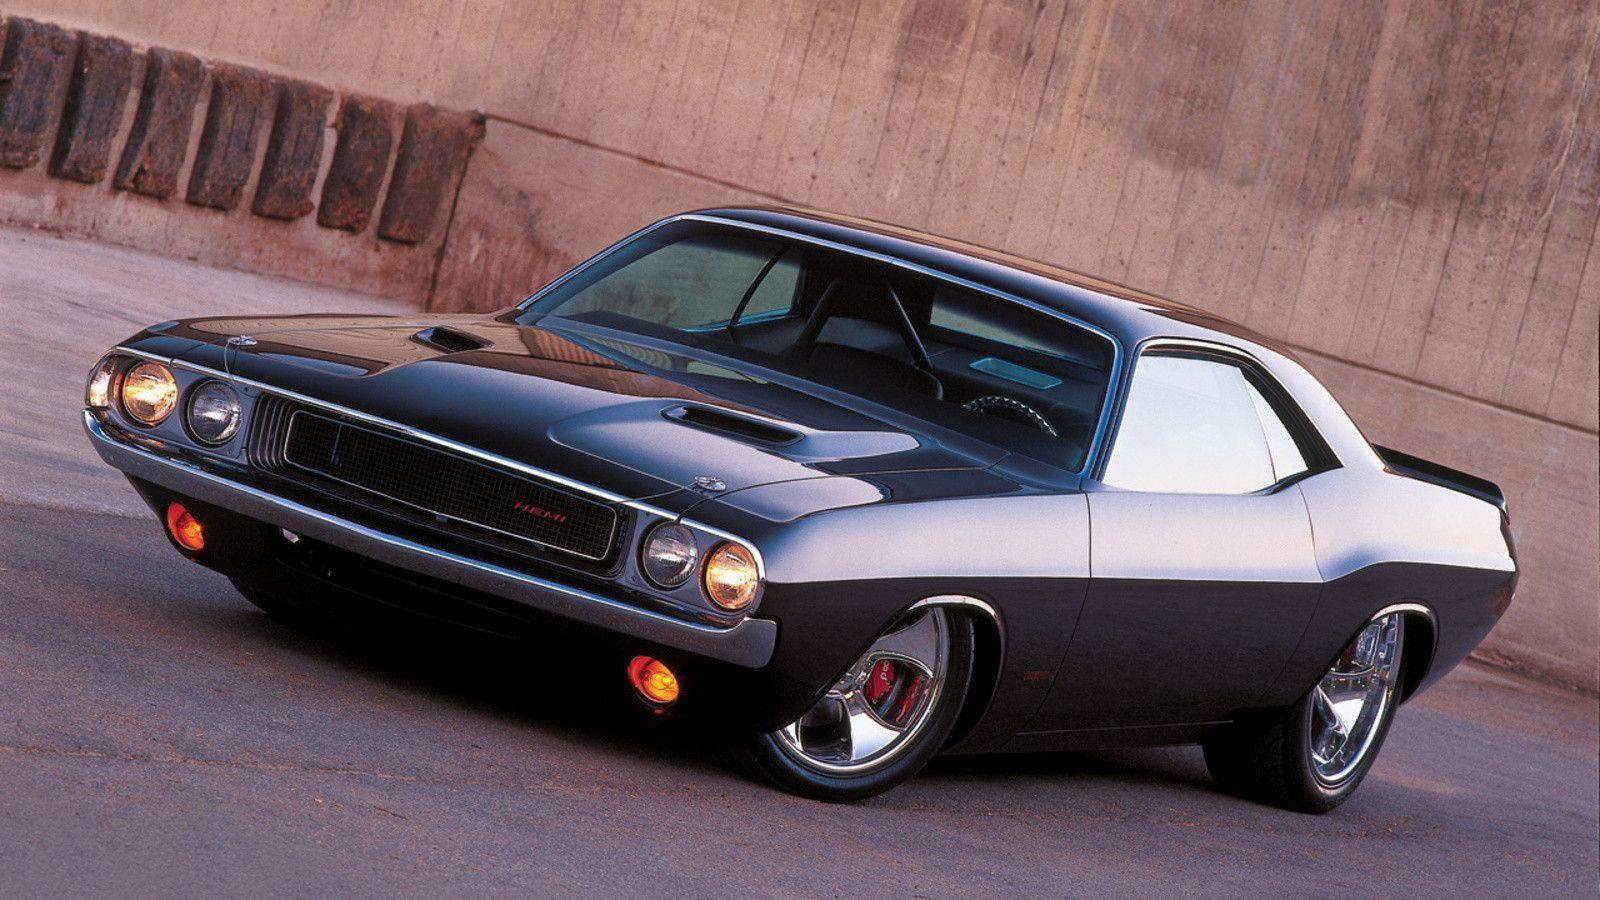 Cool Muscle Cars HD Wallpaper Download Free